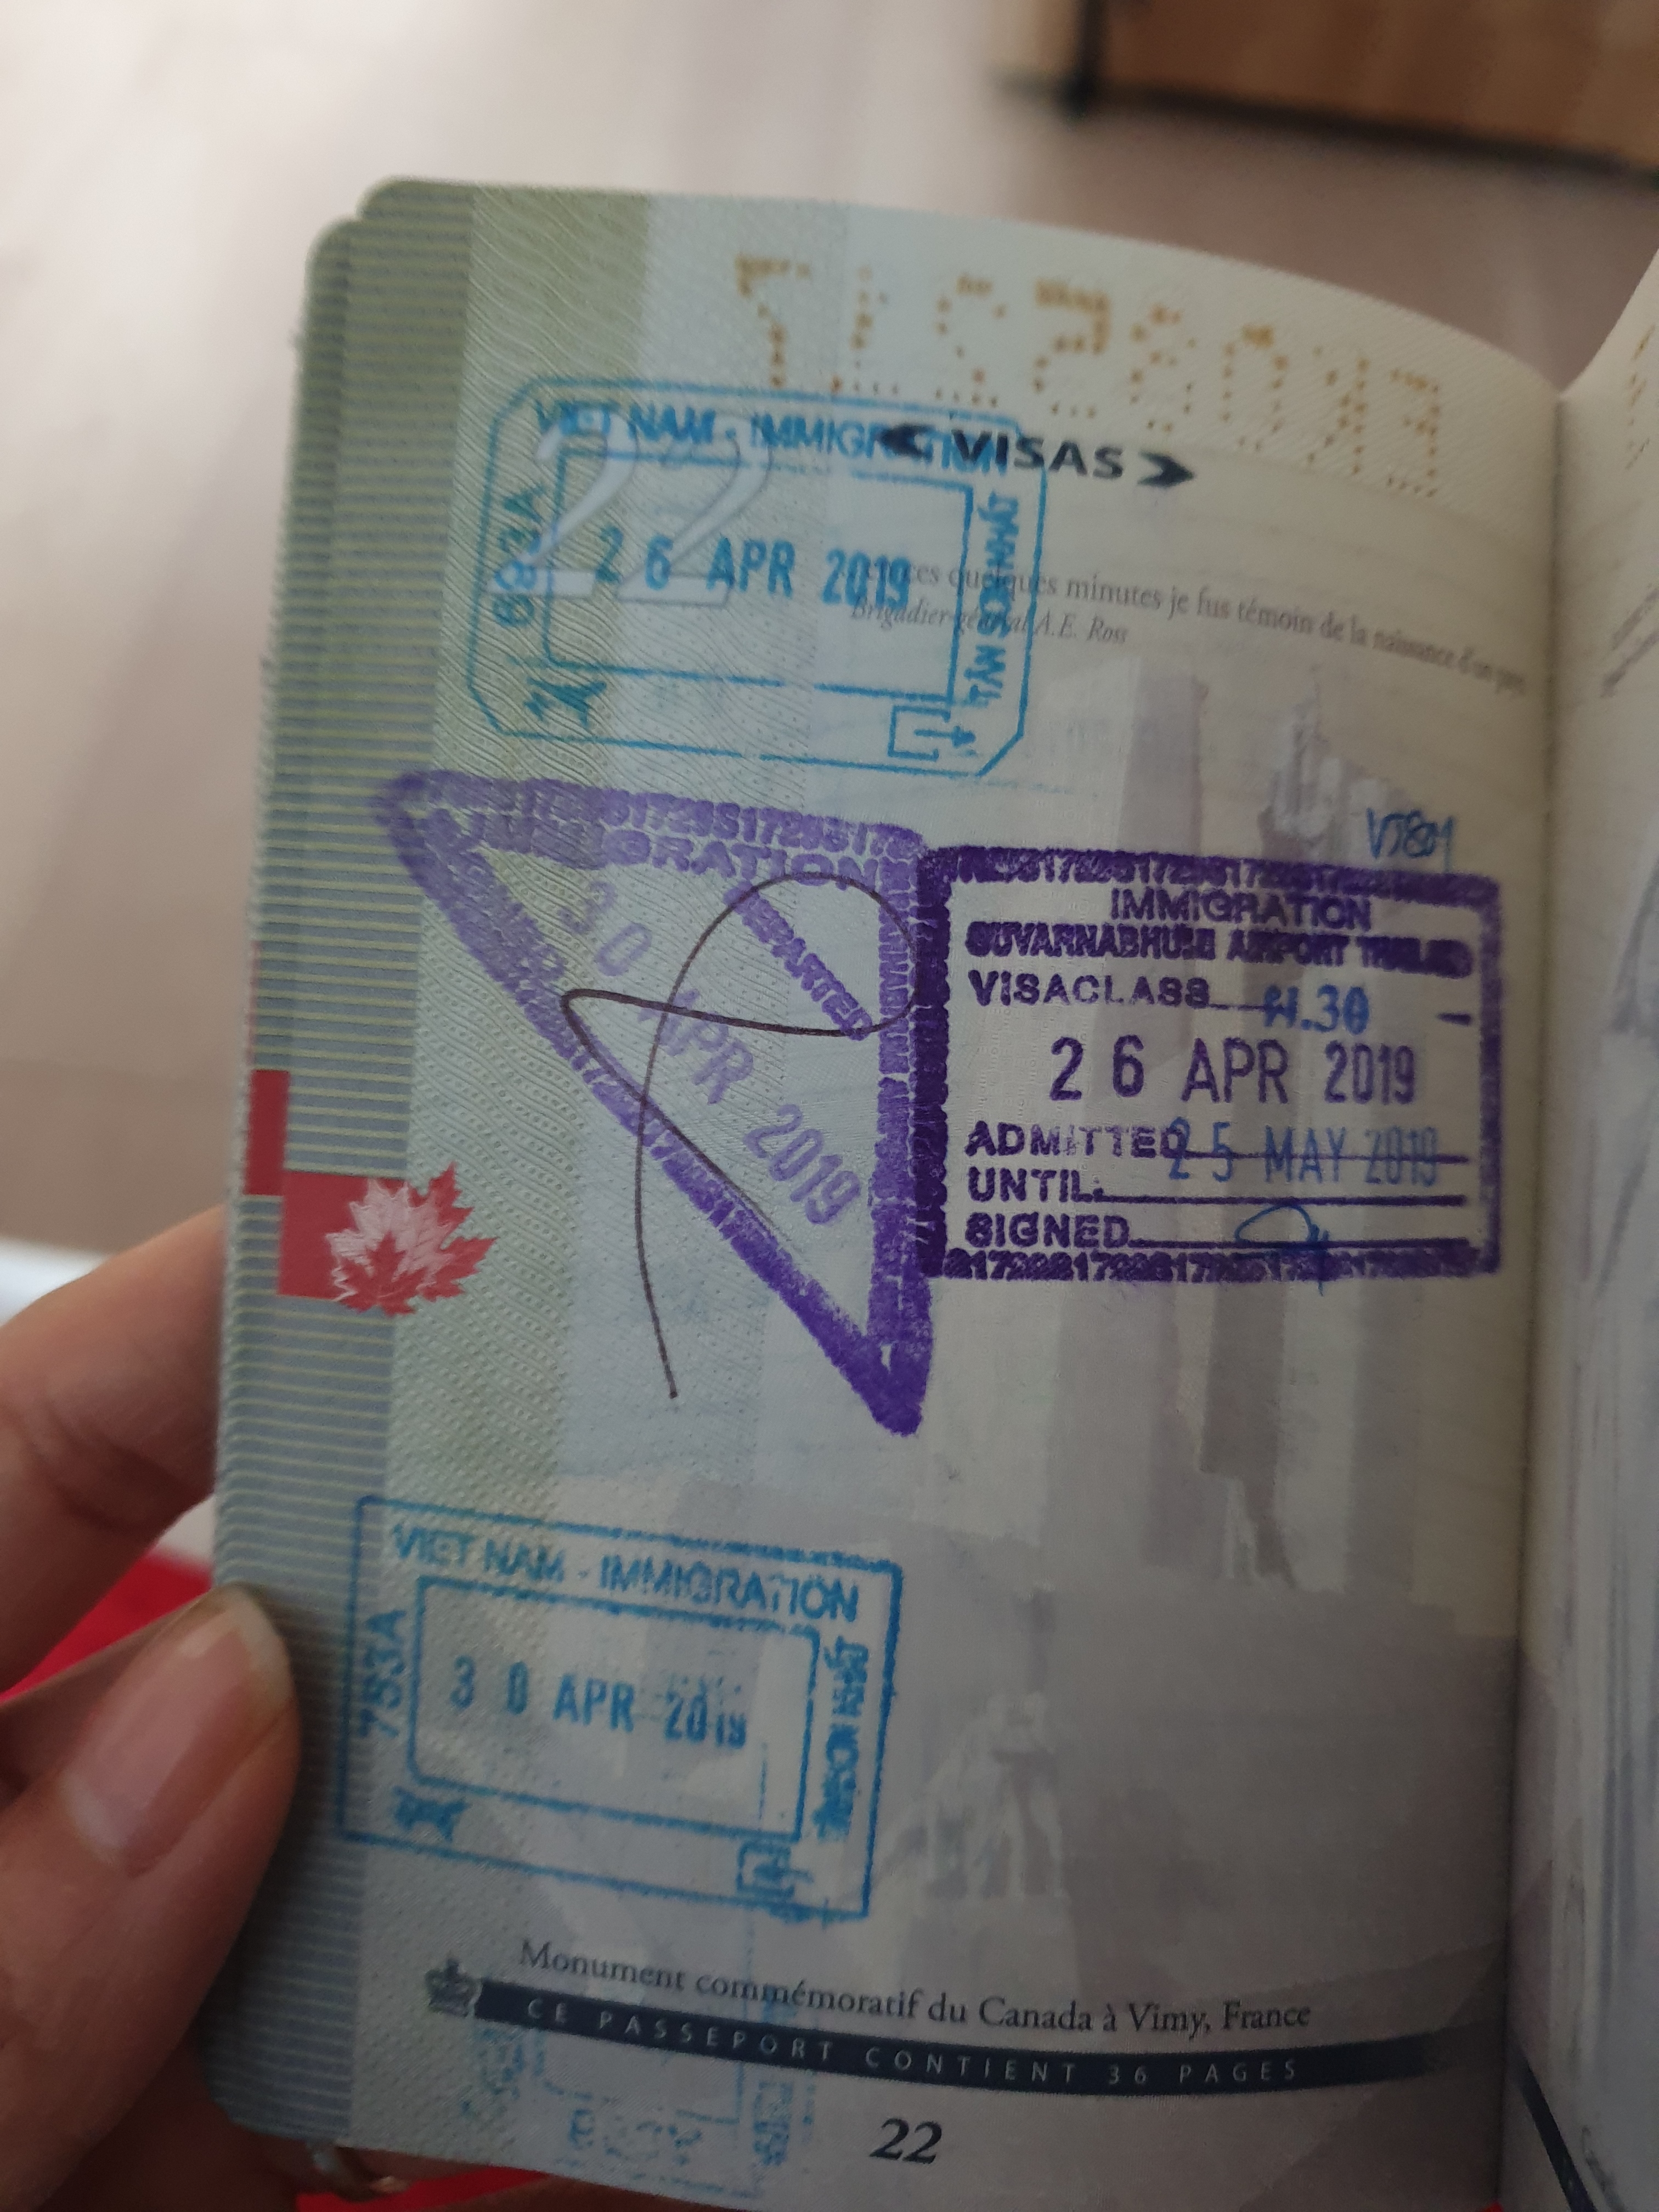 Address Of Vietnam Immigration Office In Tien Giang And Ways To Do Visa Extensions & Visa Renewals